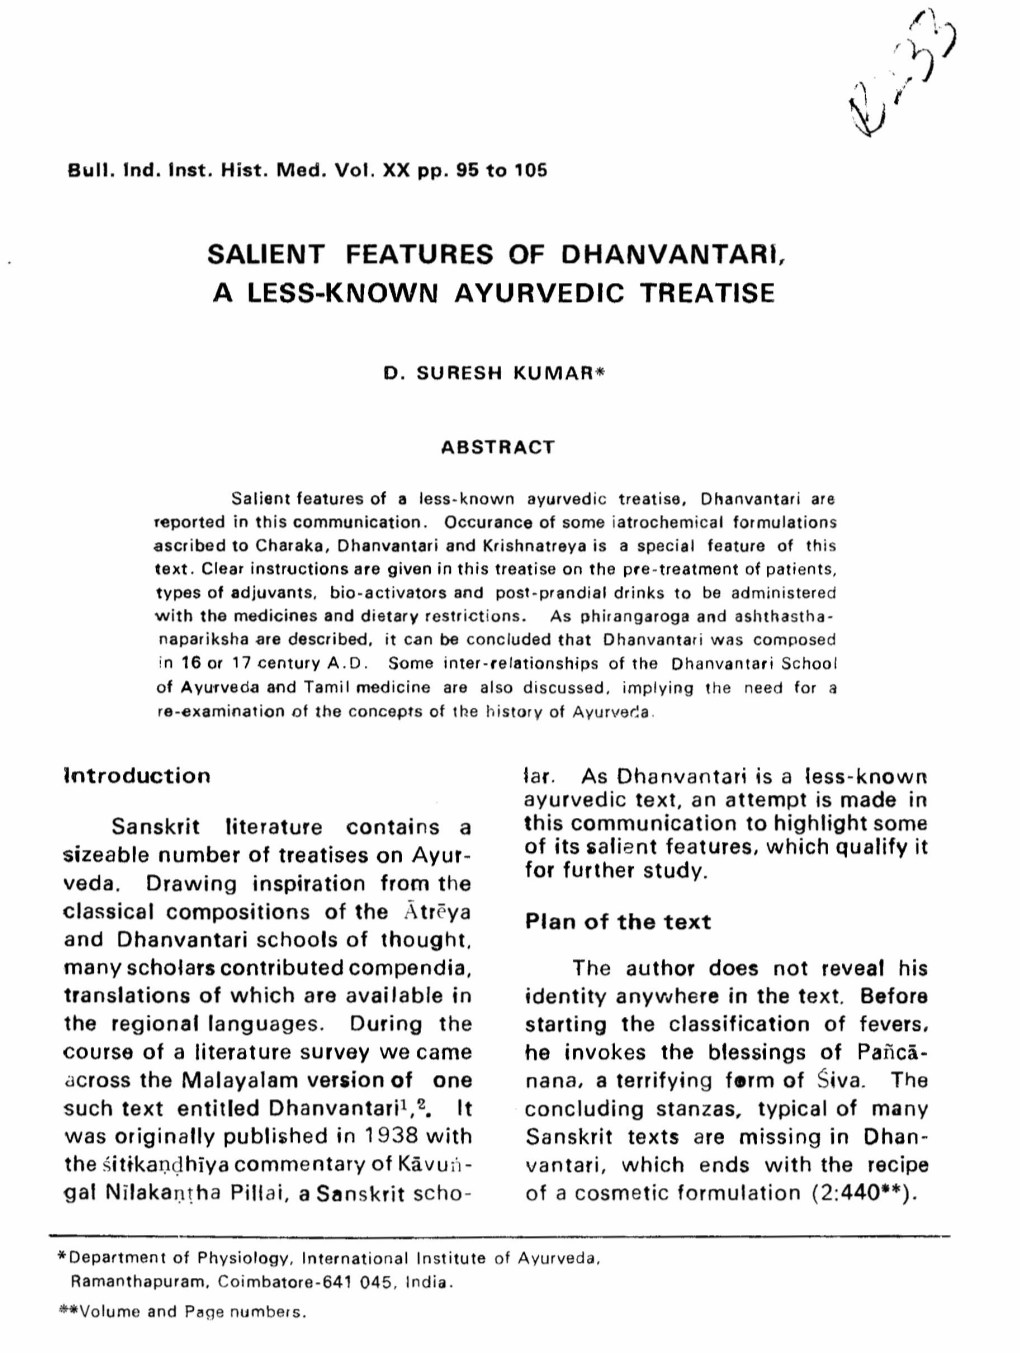 Salient Features of Dhanvantari, a Less-Known Ayurvedic Treatise